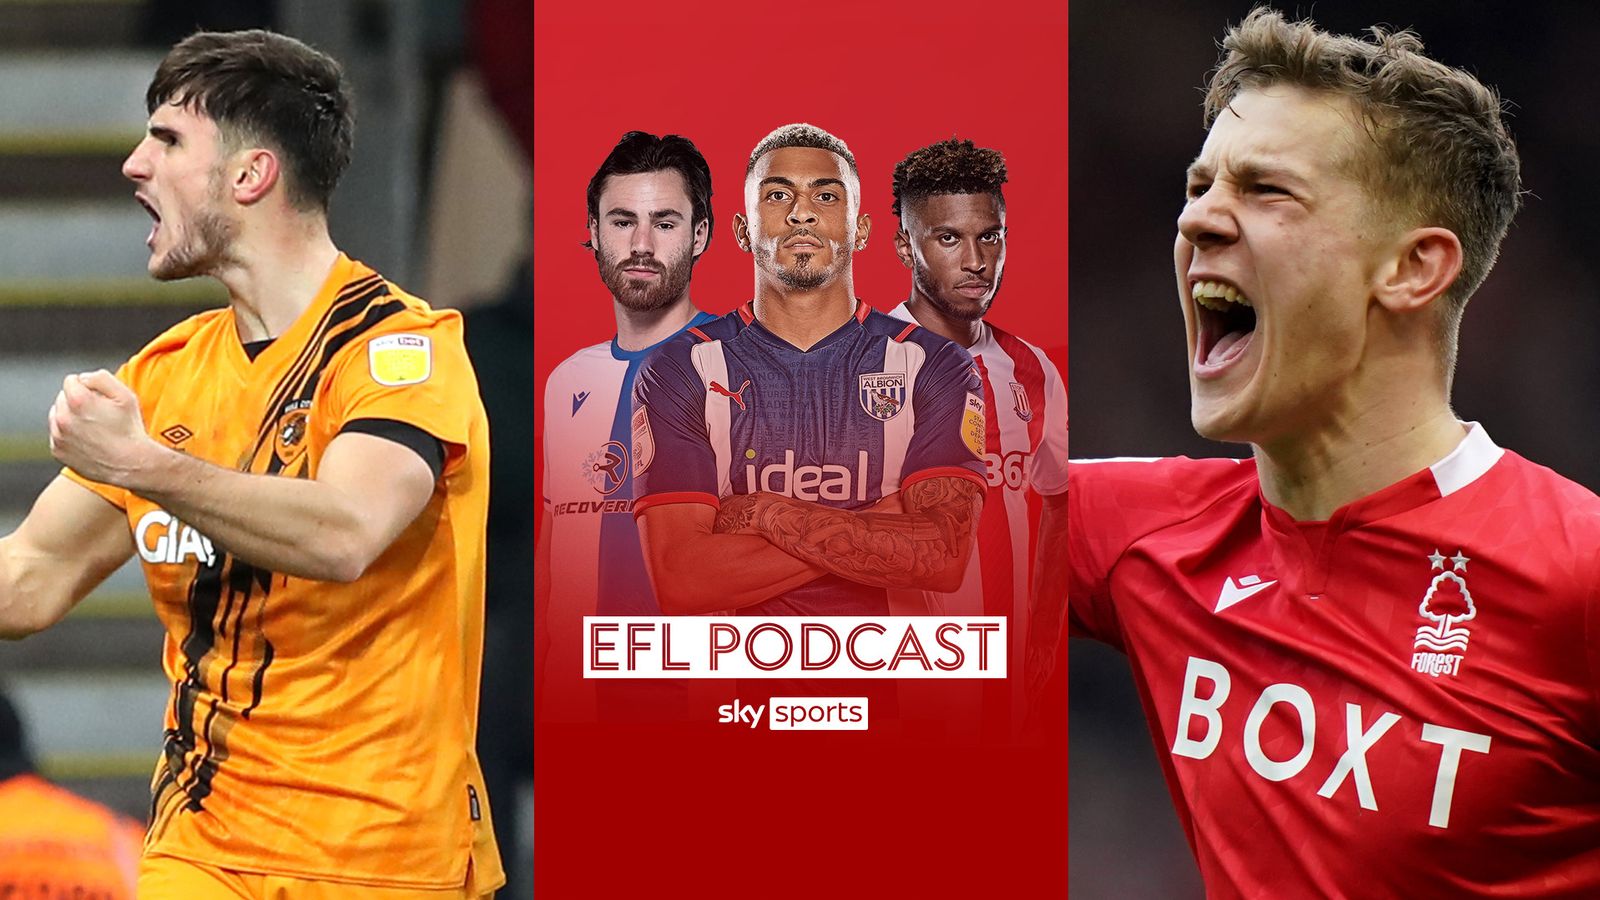 Subscribe to the Sky Sports EFL Podcast thumbnail